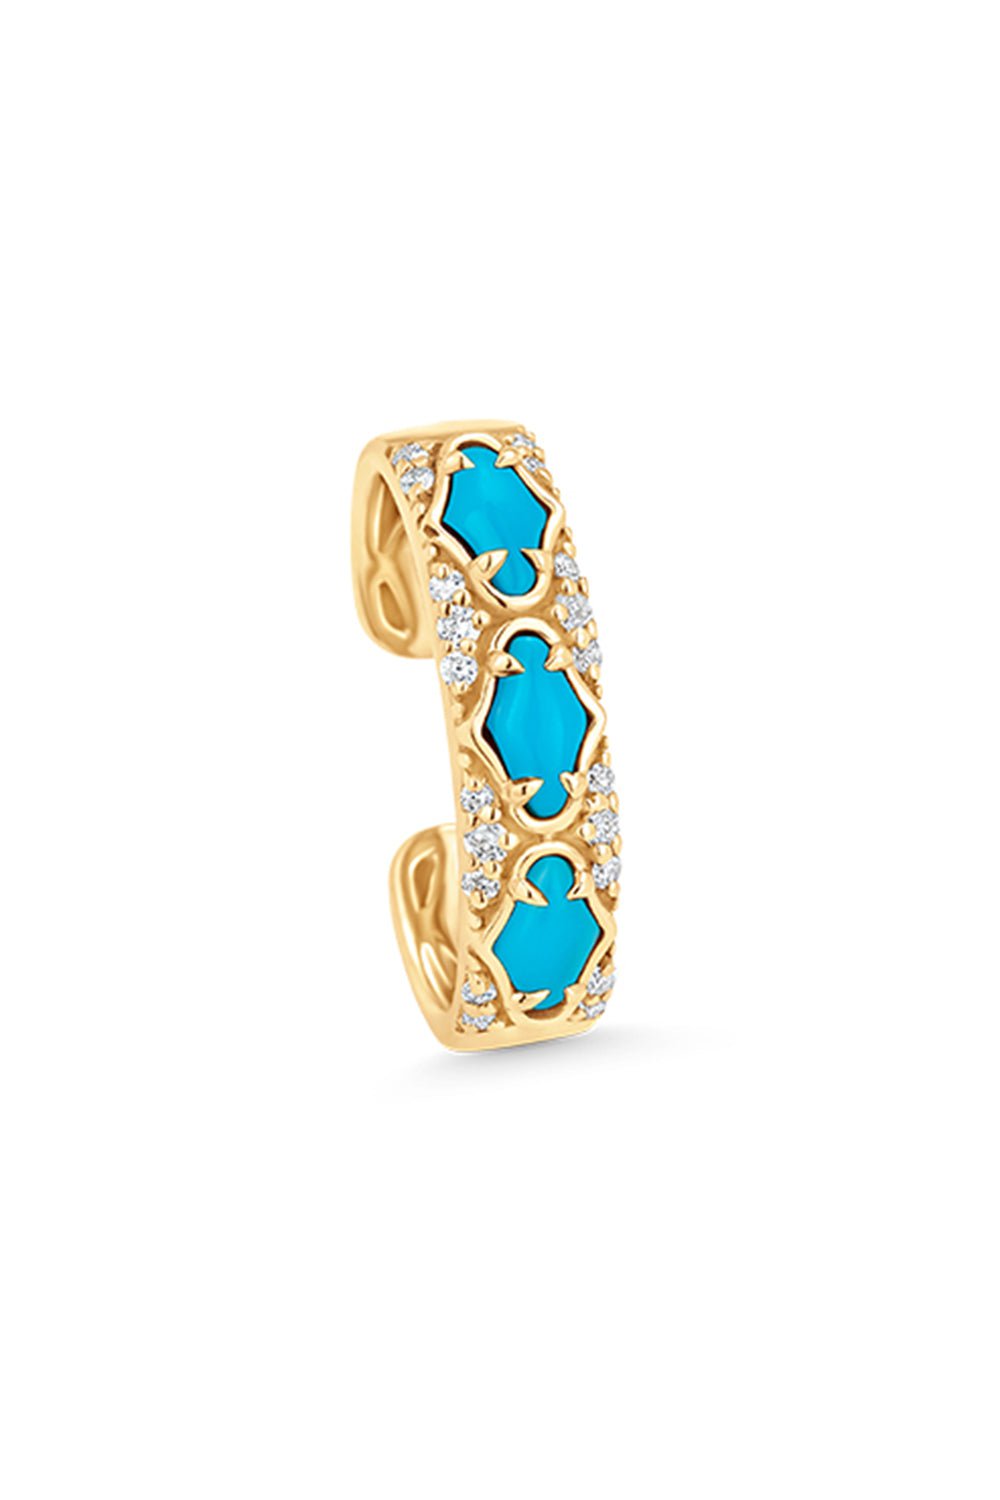 SARA WEINSTOCK-Lucia Turquoise Ear Cuff-YELLOW GOLD